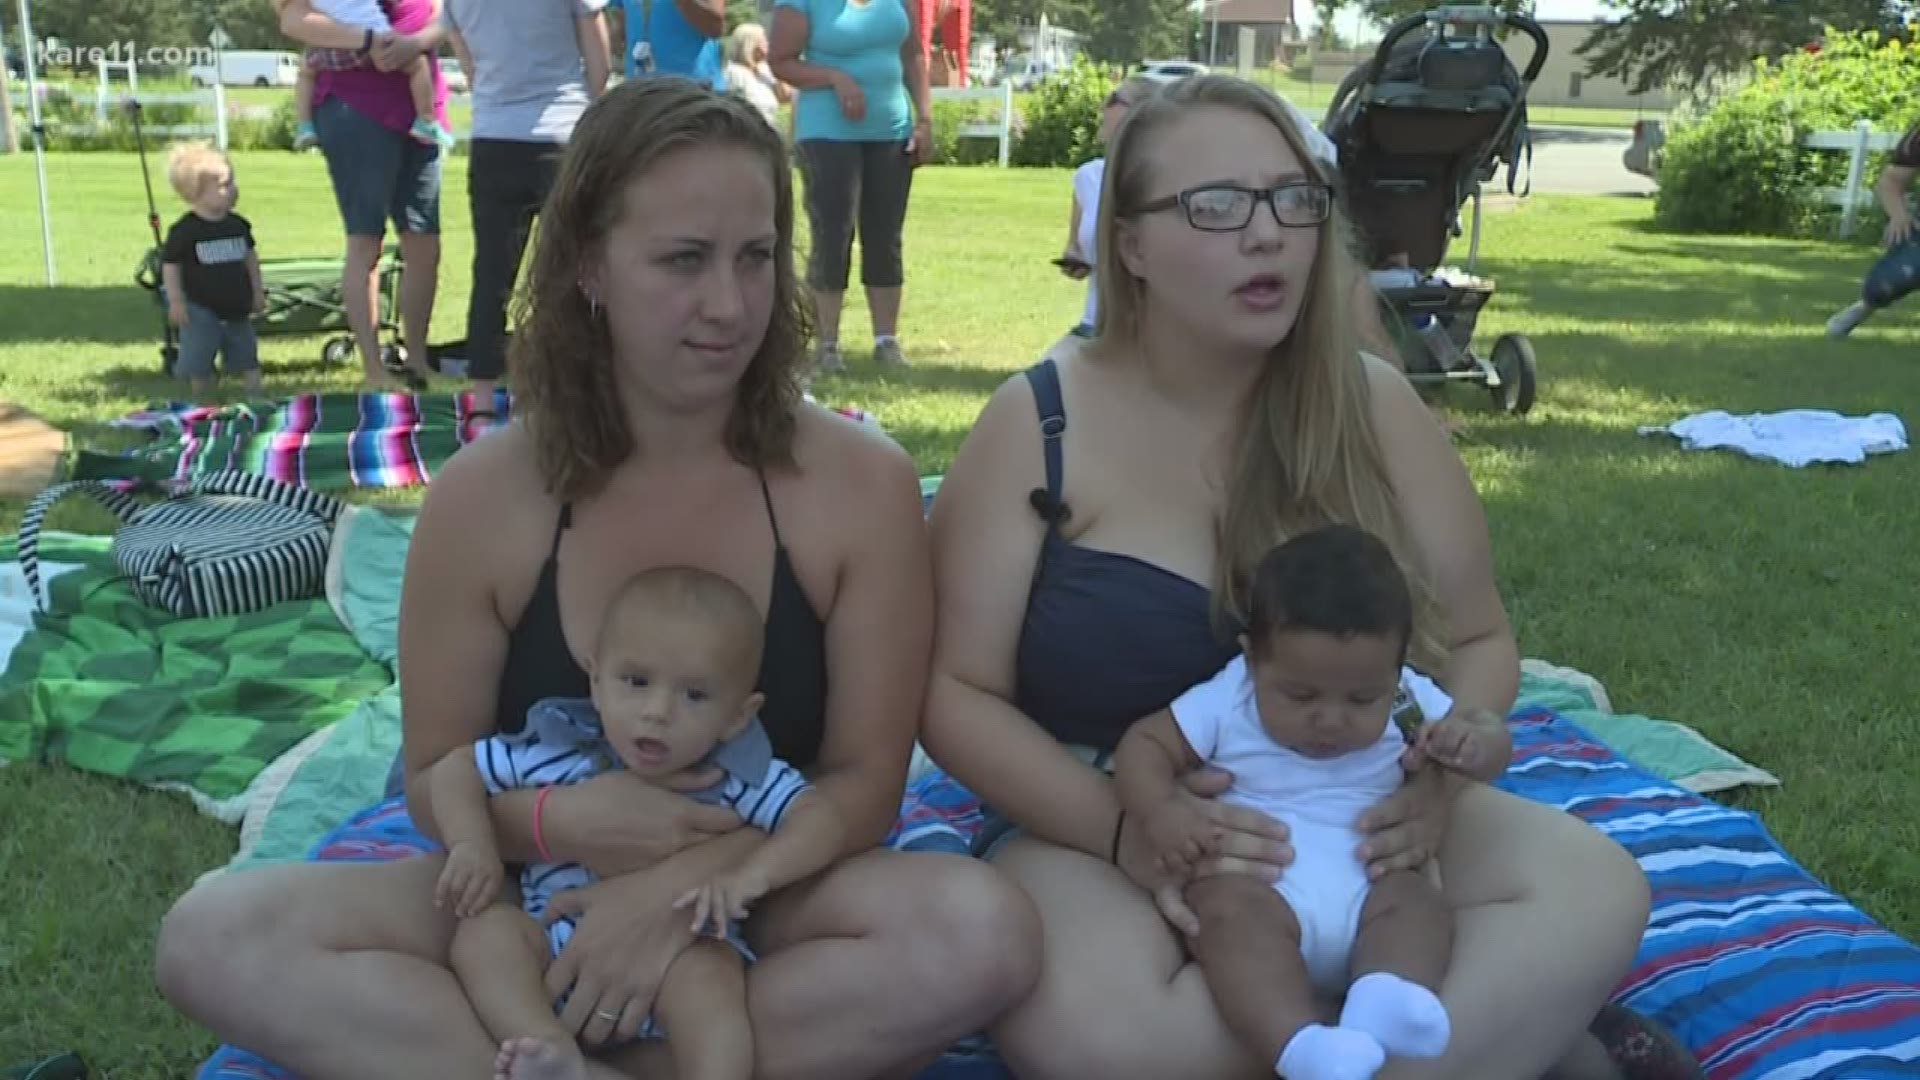 Two mothers who say they were asked to cover up or move to a more discreet location while breastfeeding at Mora Aquatic Center organized a nurse-in Saturday. https://kare11.tv/2A1QtUs